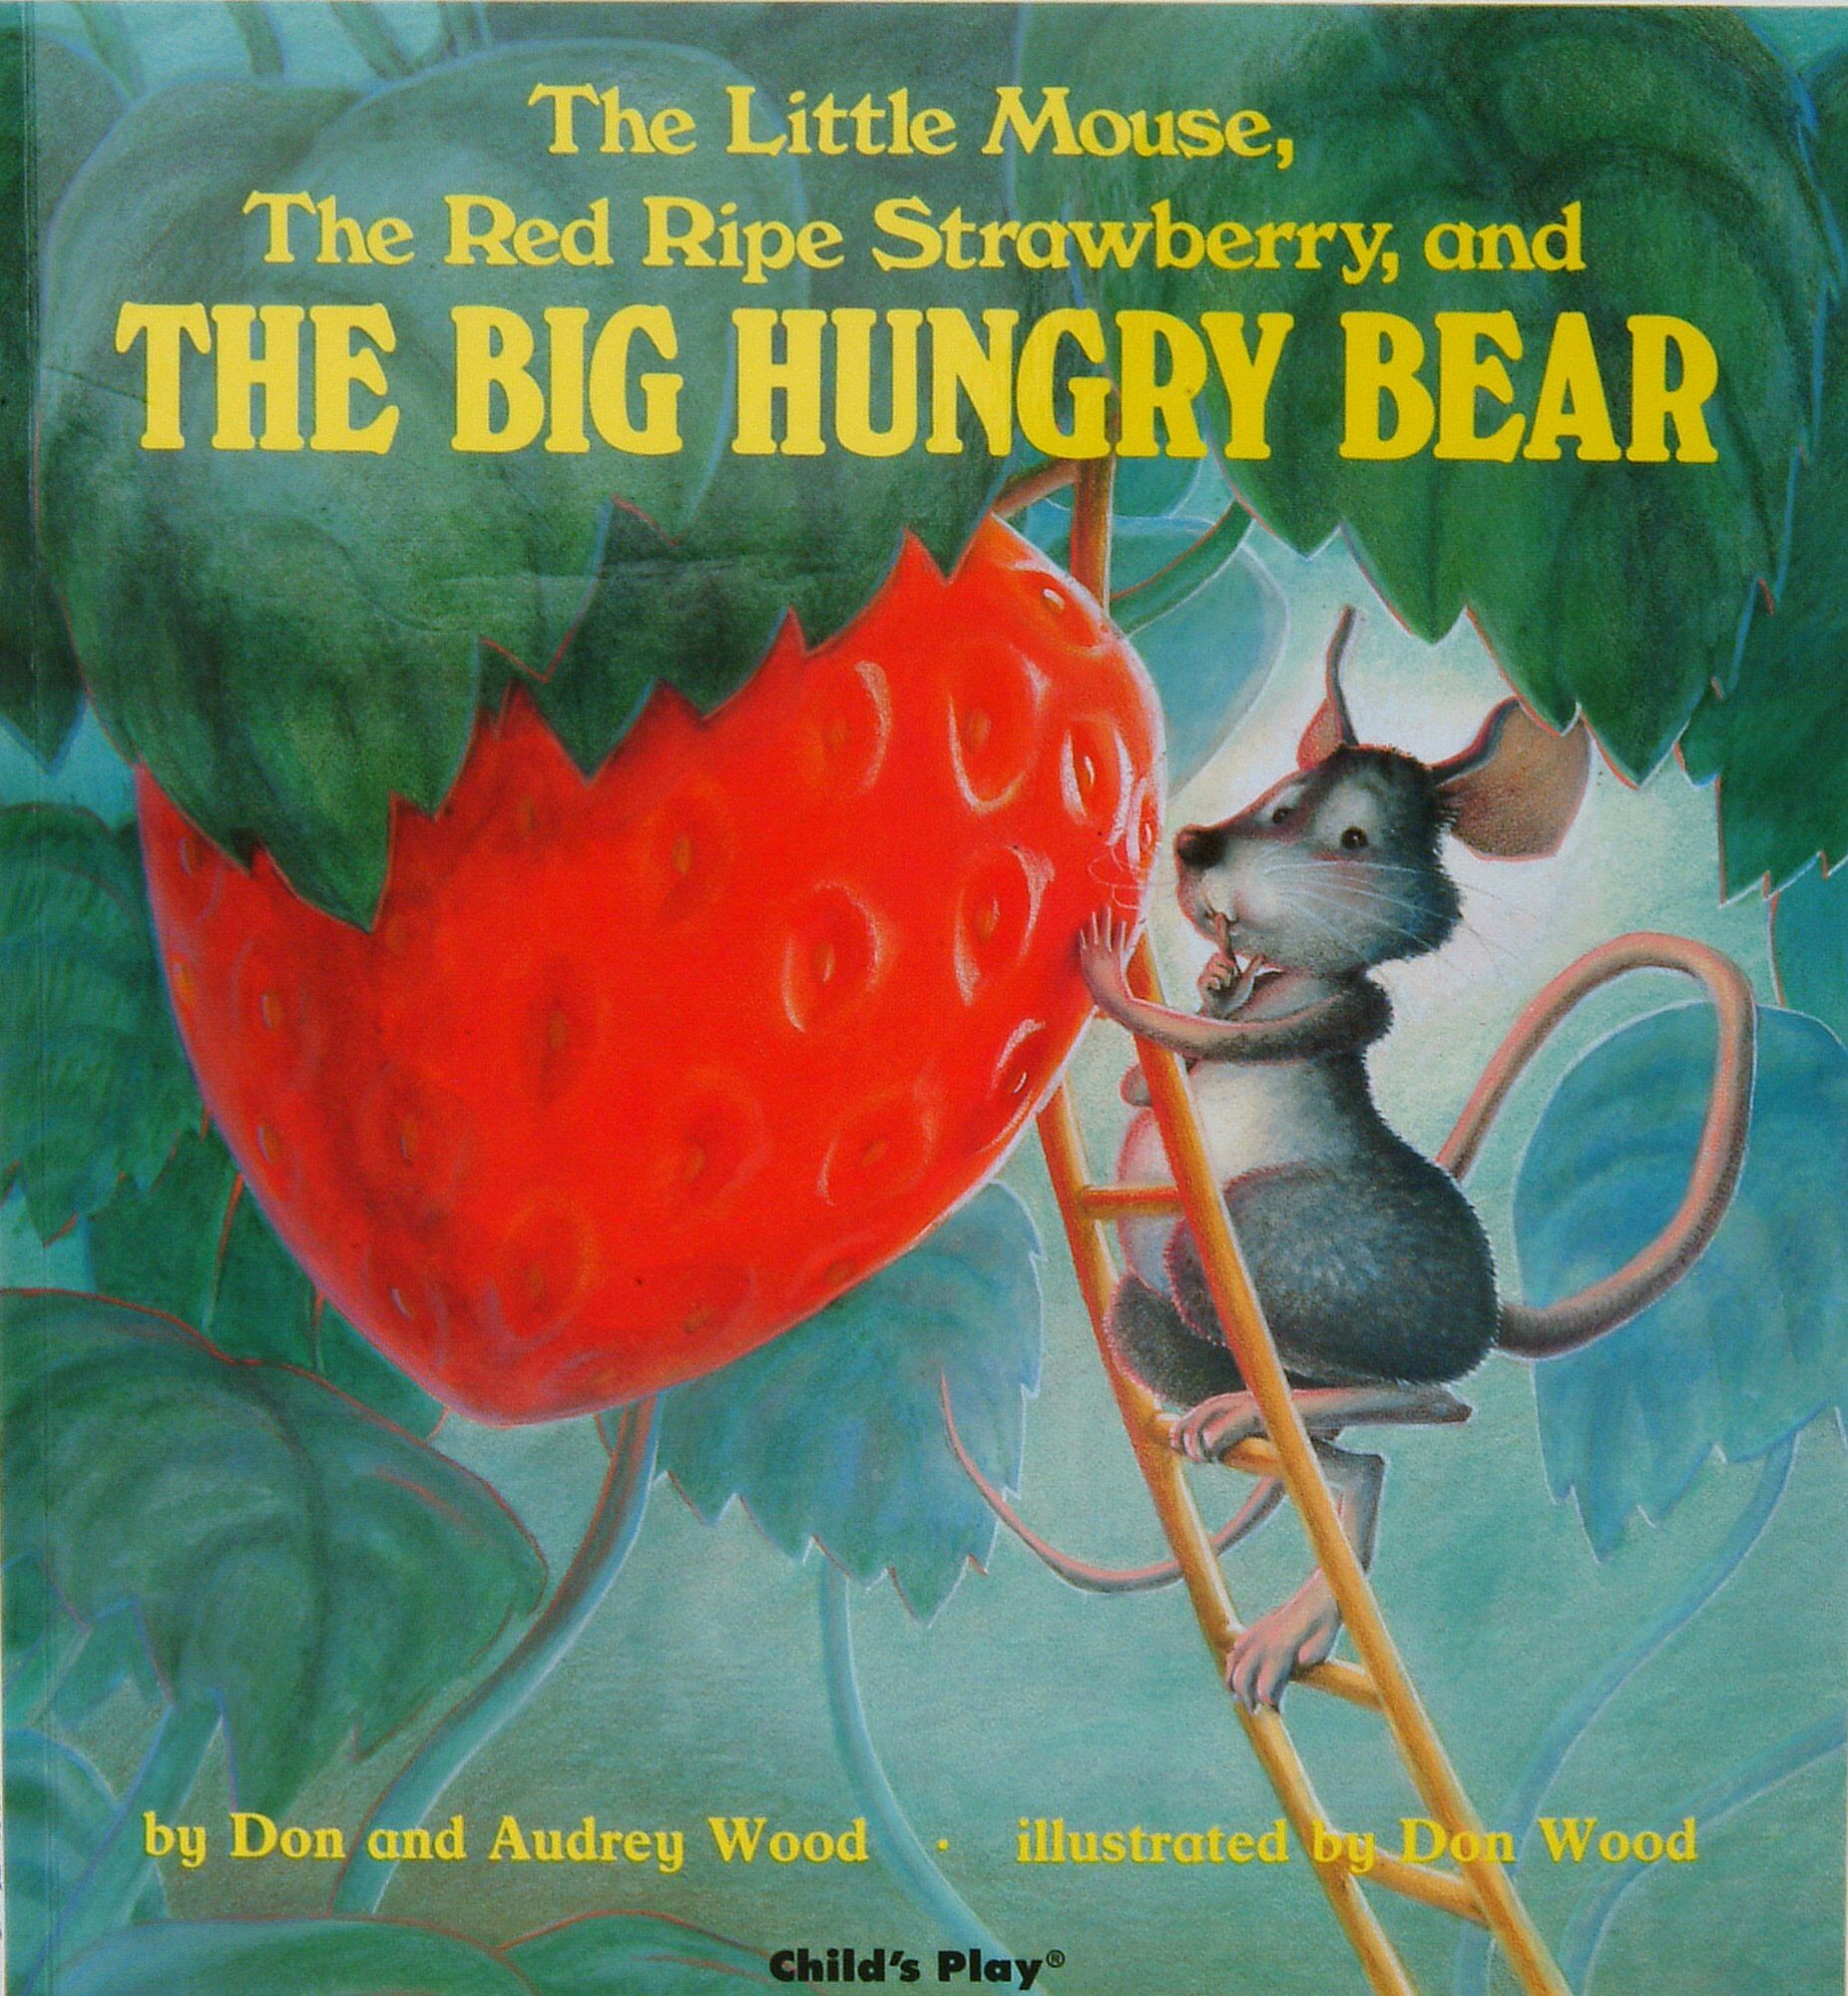 (The) Little Mouse The Red Ripe Strawberry and THE BIG HUNGRY BEAR